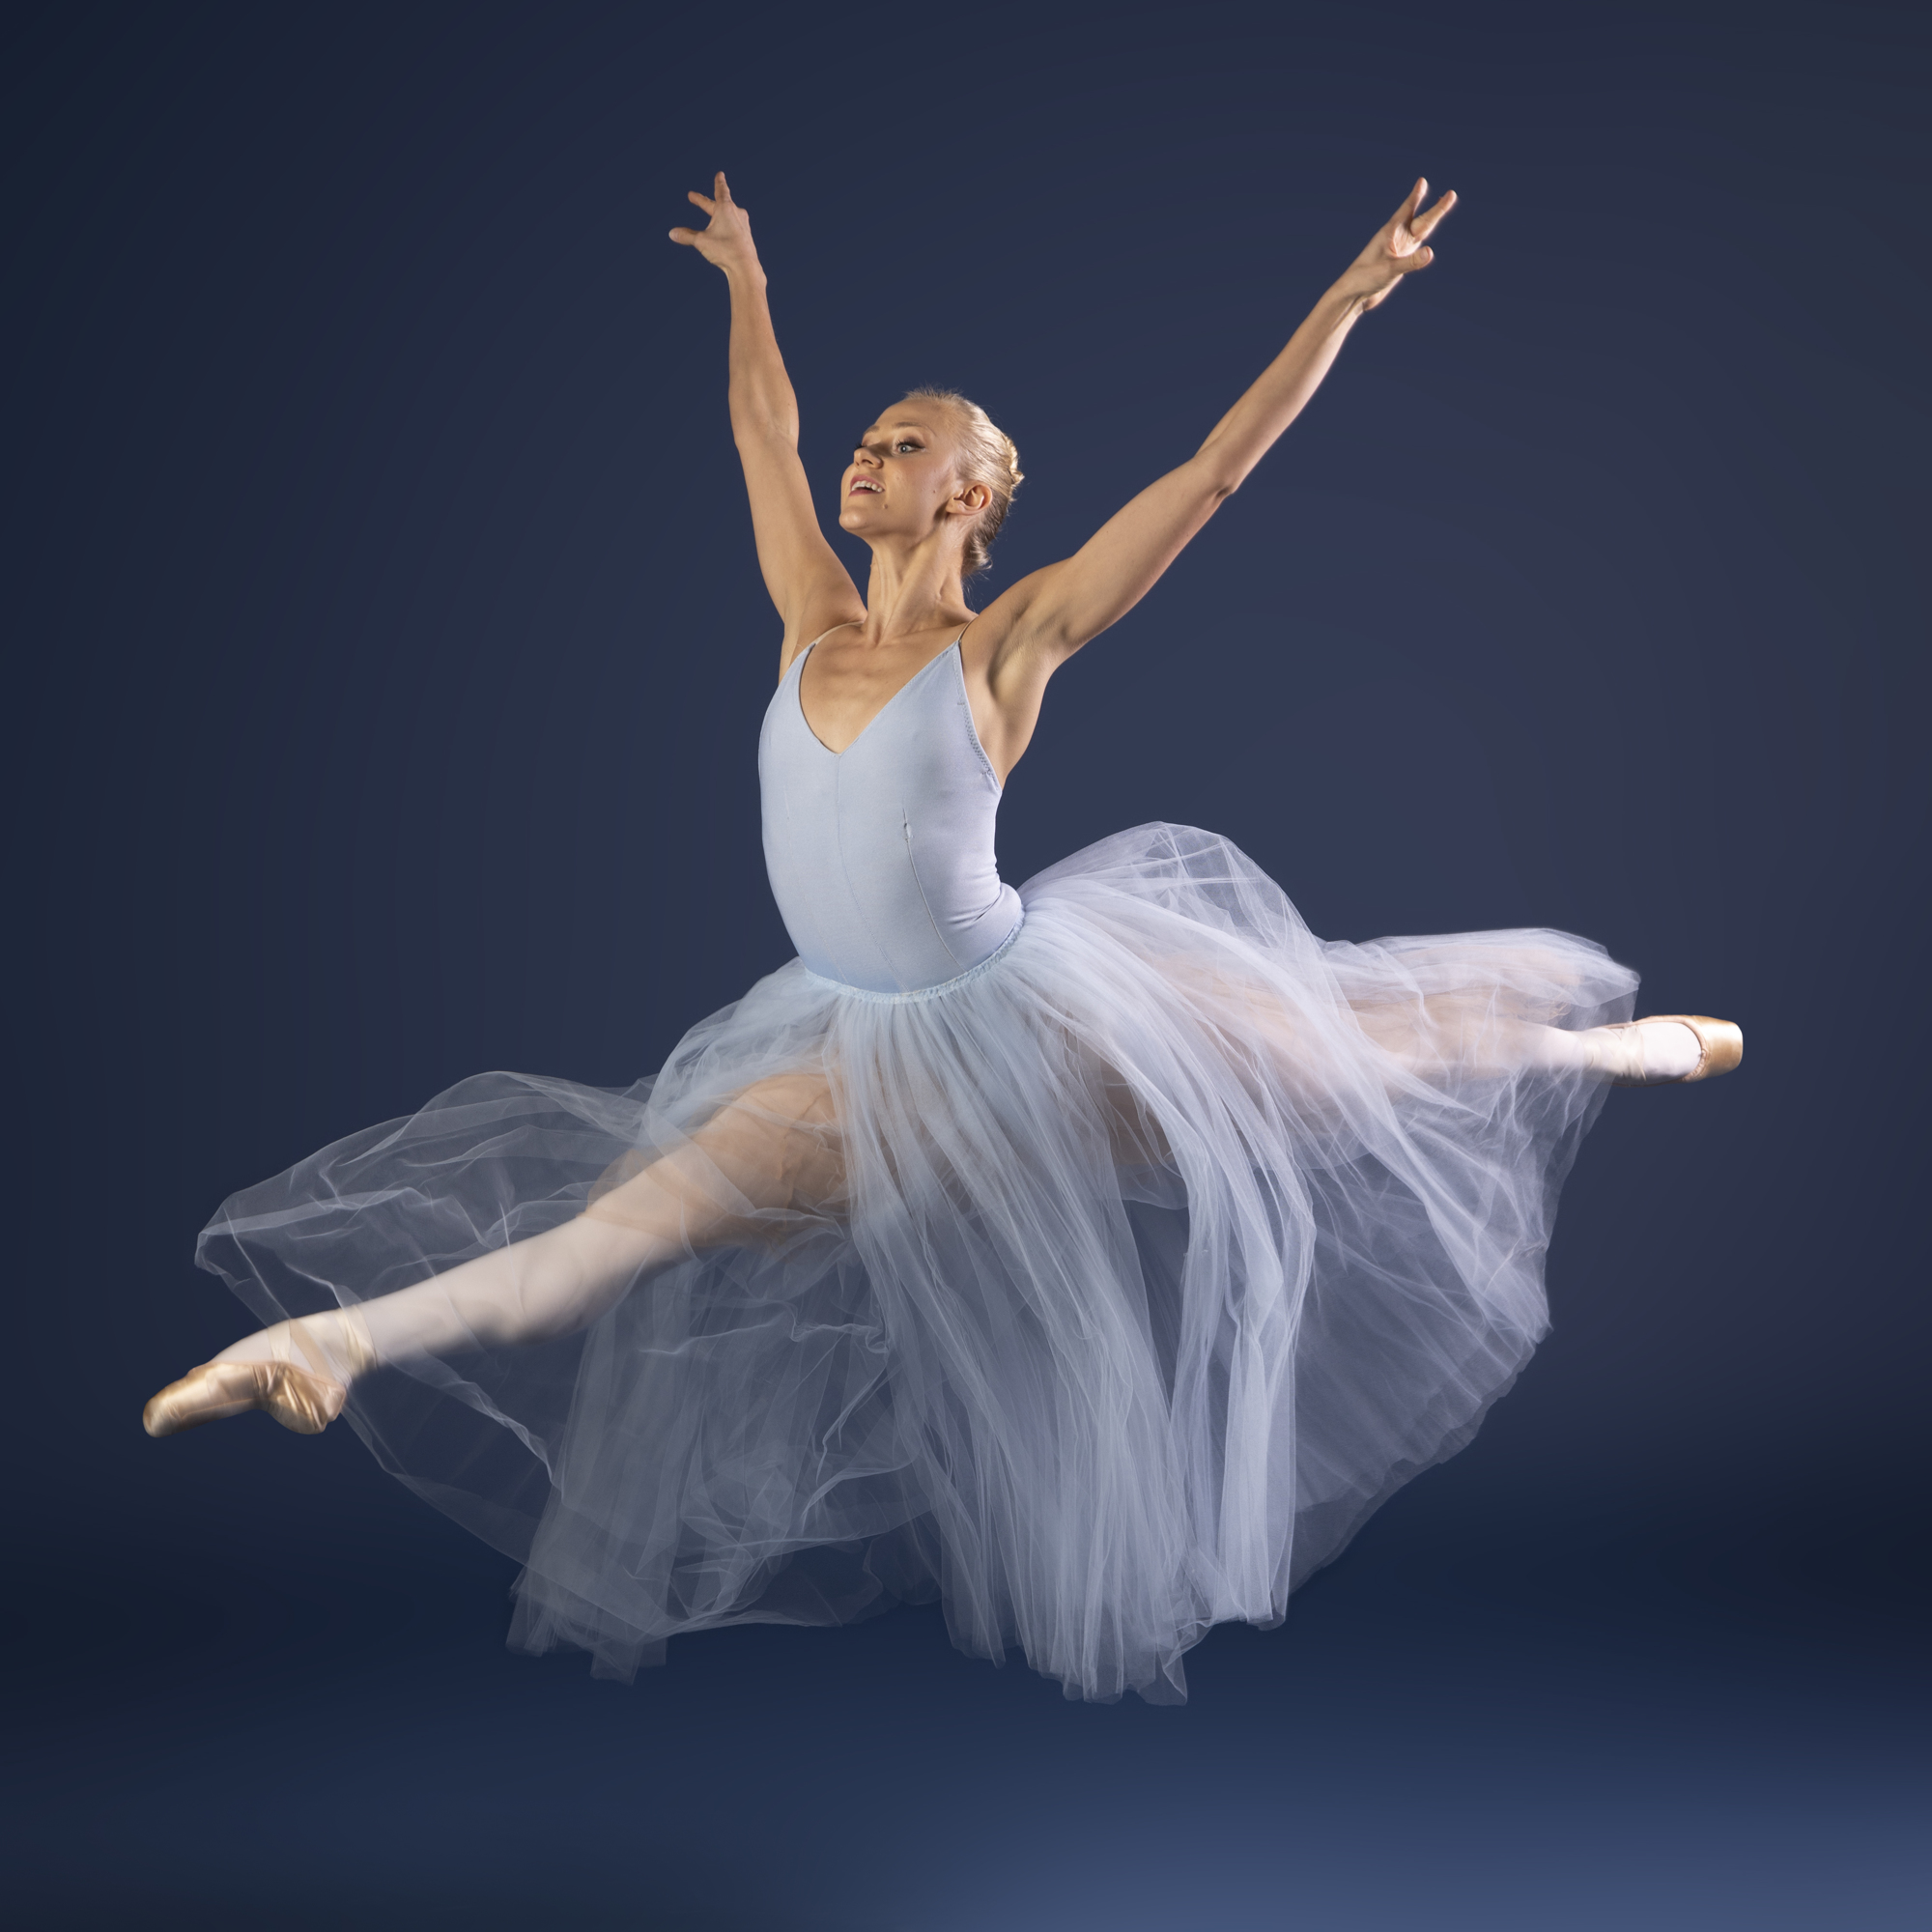 The Sarasota Ballet will close out its season with a program that includes choreography by George Balanchine, Mark Morris and Kenneth MacMillan.